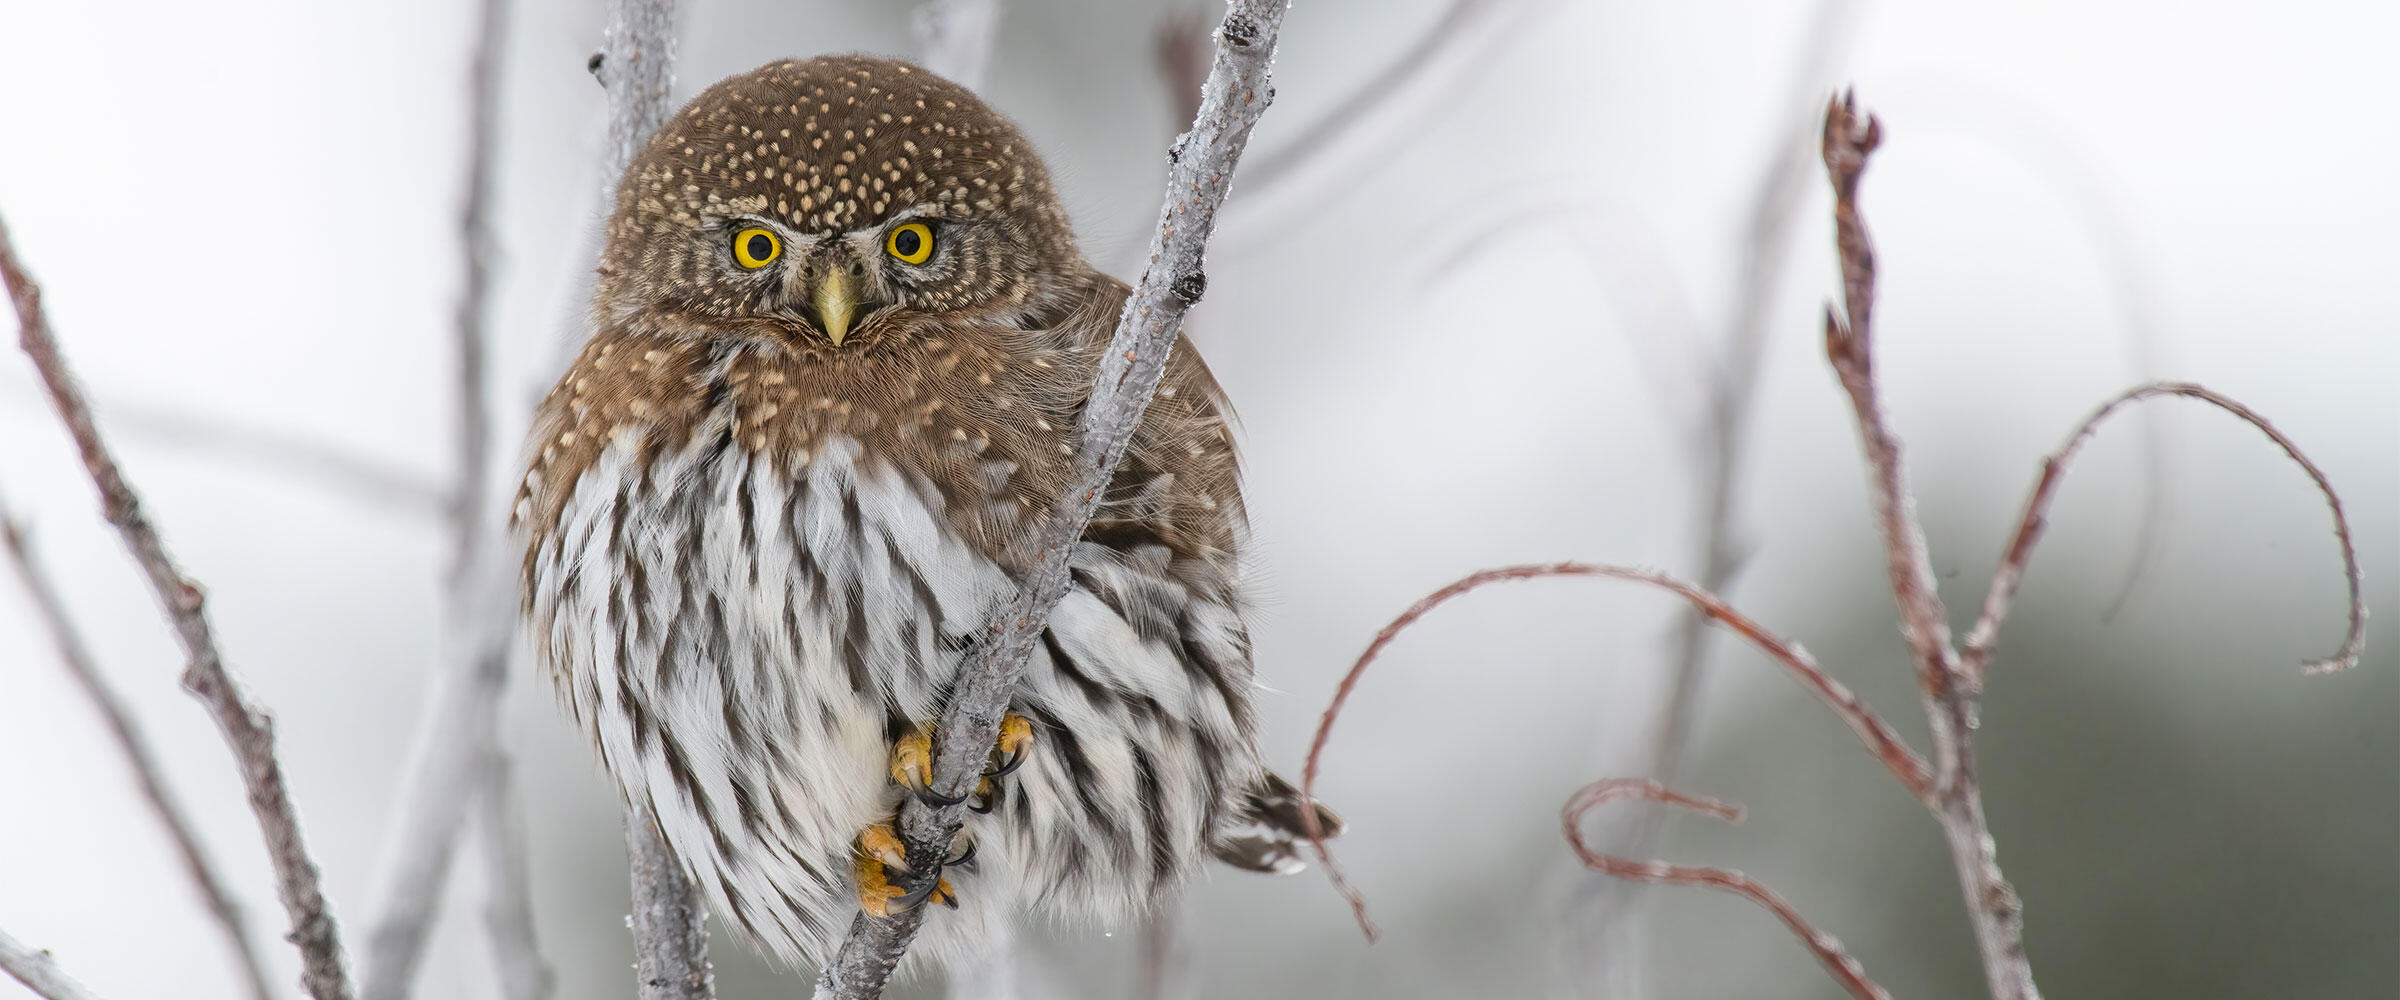 A Northern Pygmy Owl perches among bare tree branches.